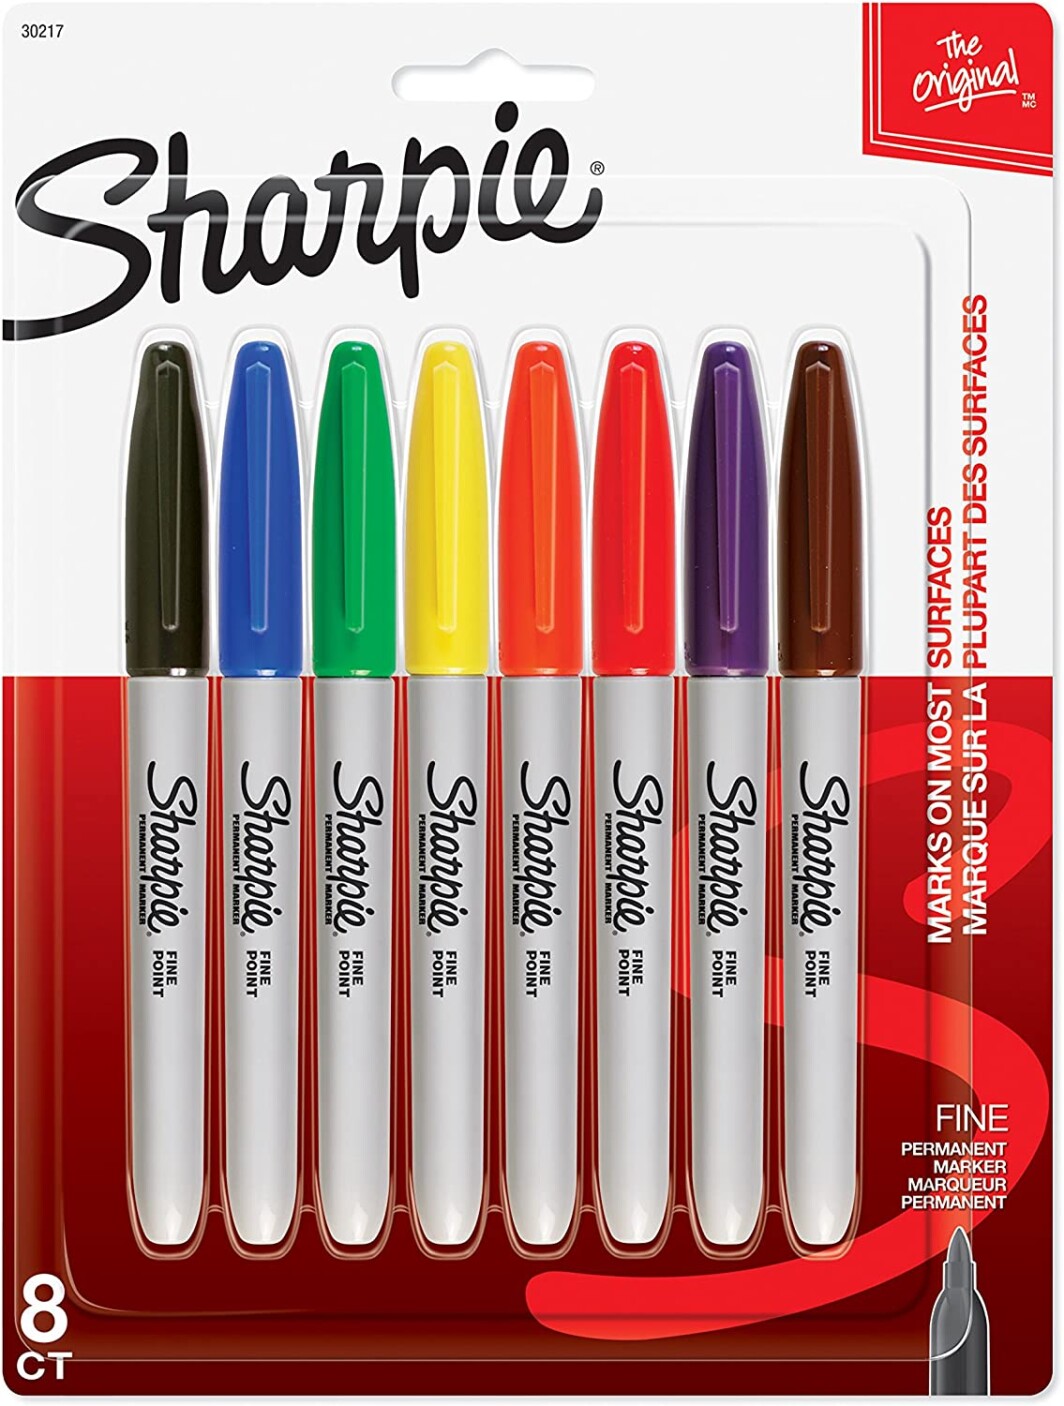 Sharpie Permanent Markers, Fine Point, 8 Pack, Assorted Colors (30217PP)-0